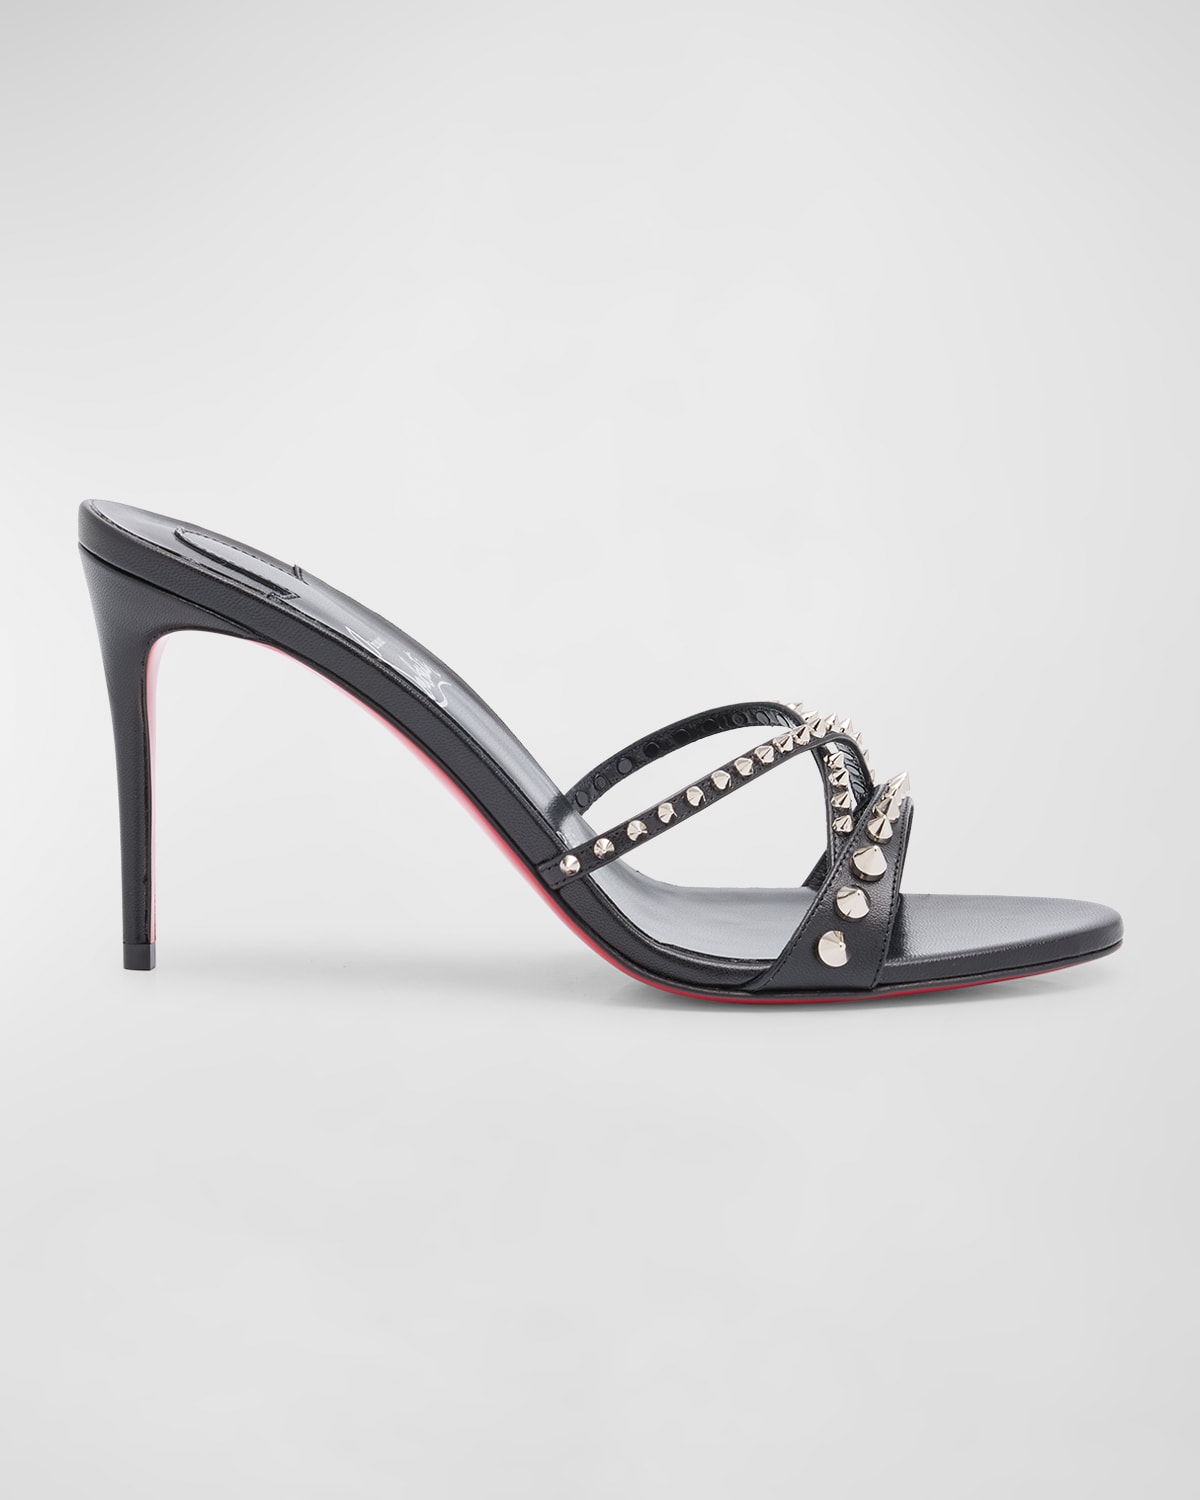 Christian Louboutin Tatoosh Spikes Red Sole Slide Sandals In Black